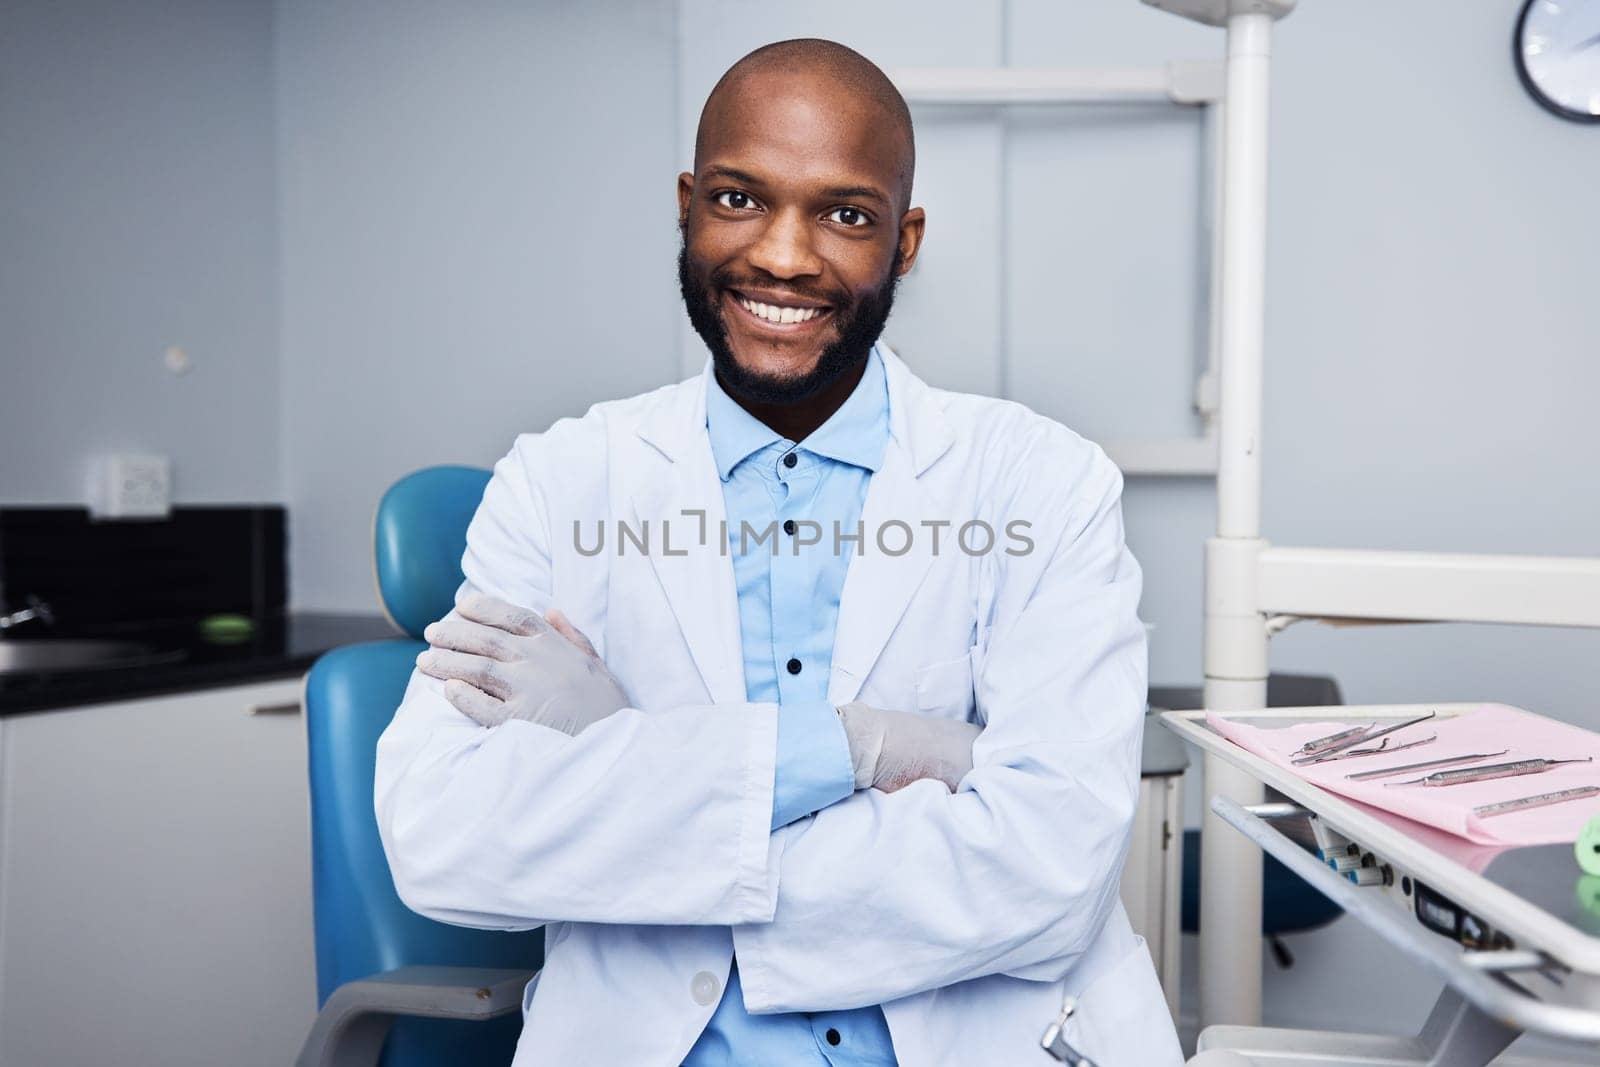 Have a dental health concern Come see me. Portrait of a confident young man working in a dentists office